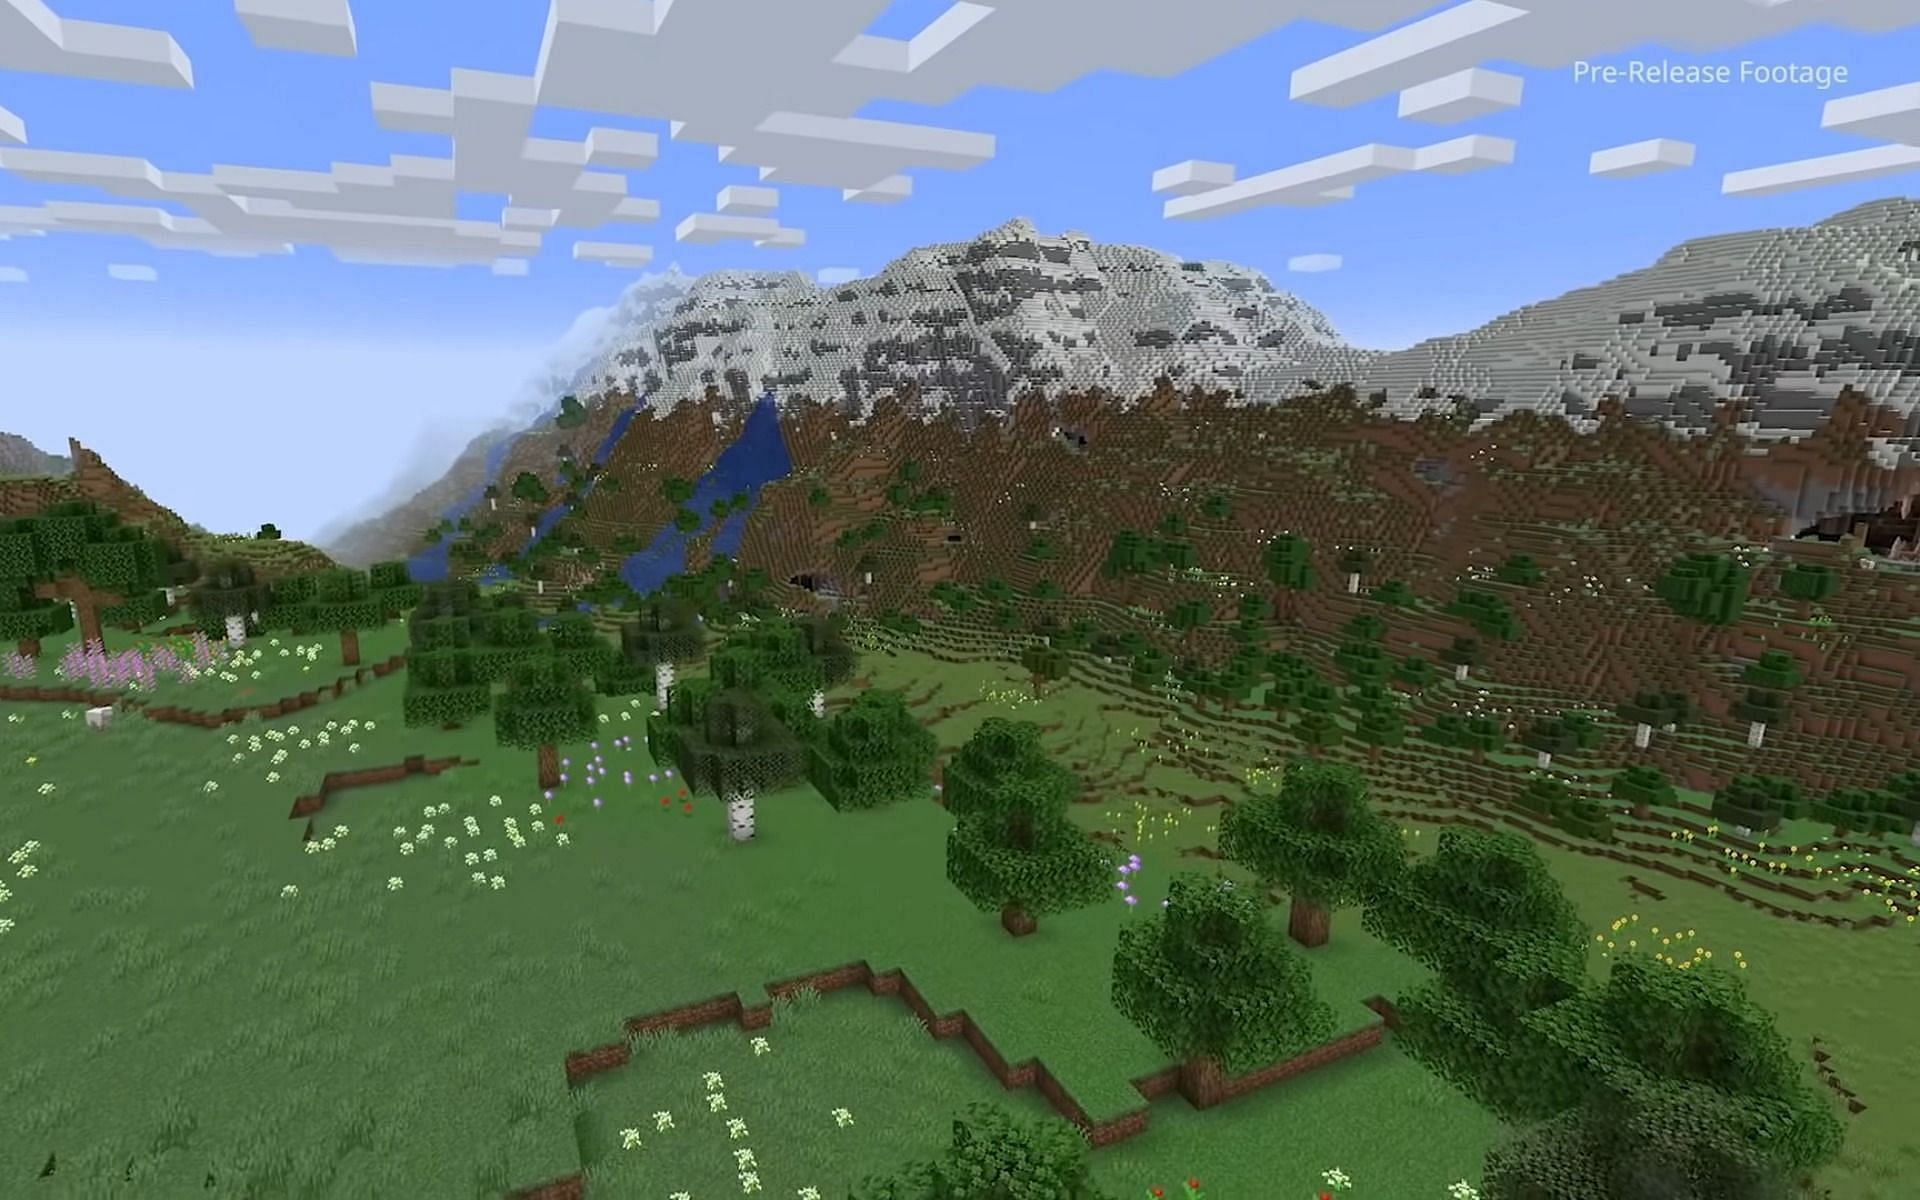 Tall mountains and deep caves were featured in the official trailer (Image via Minecraft)